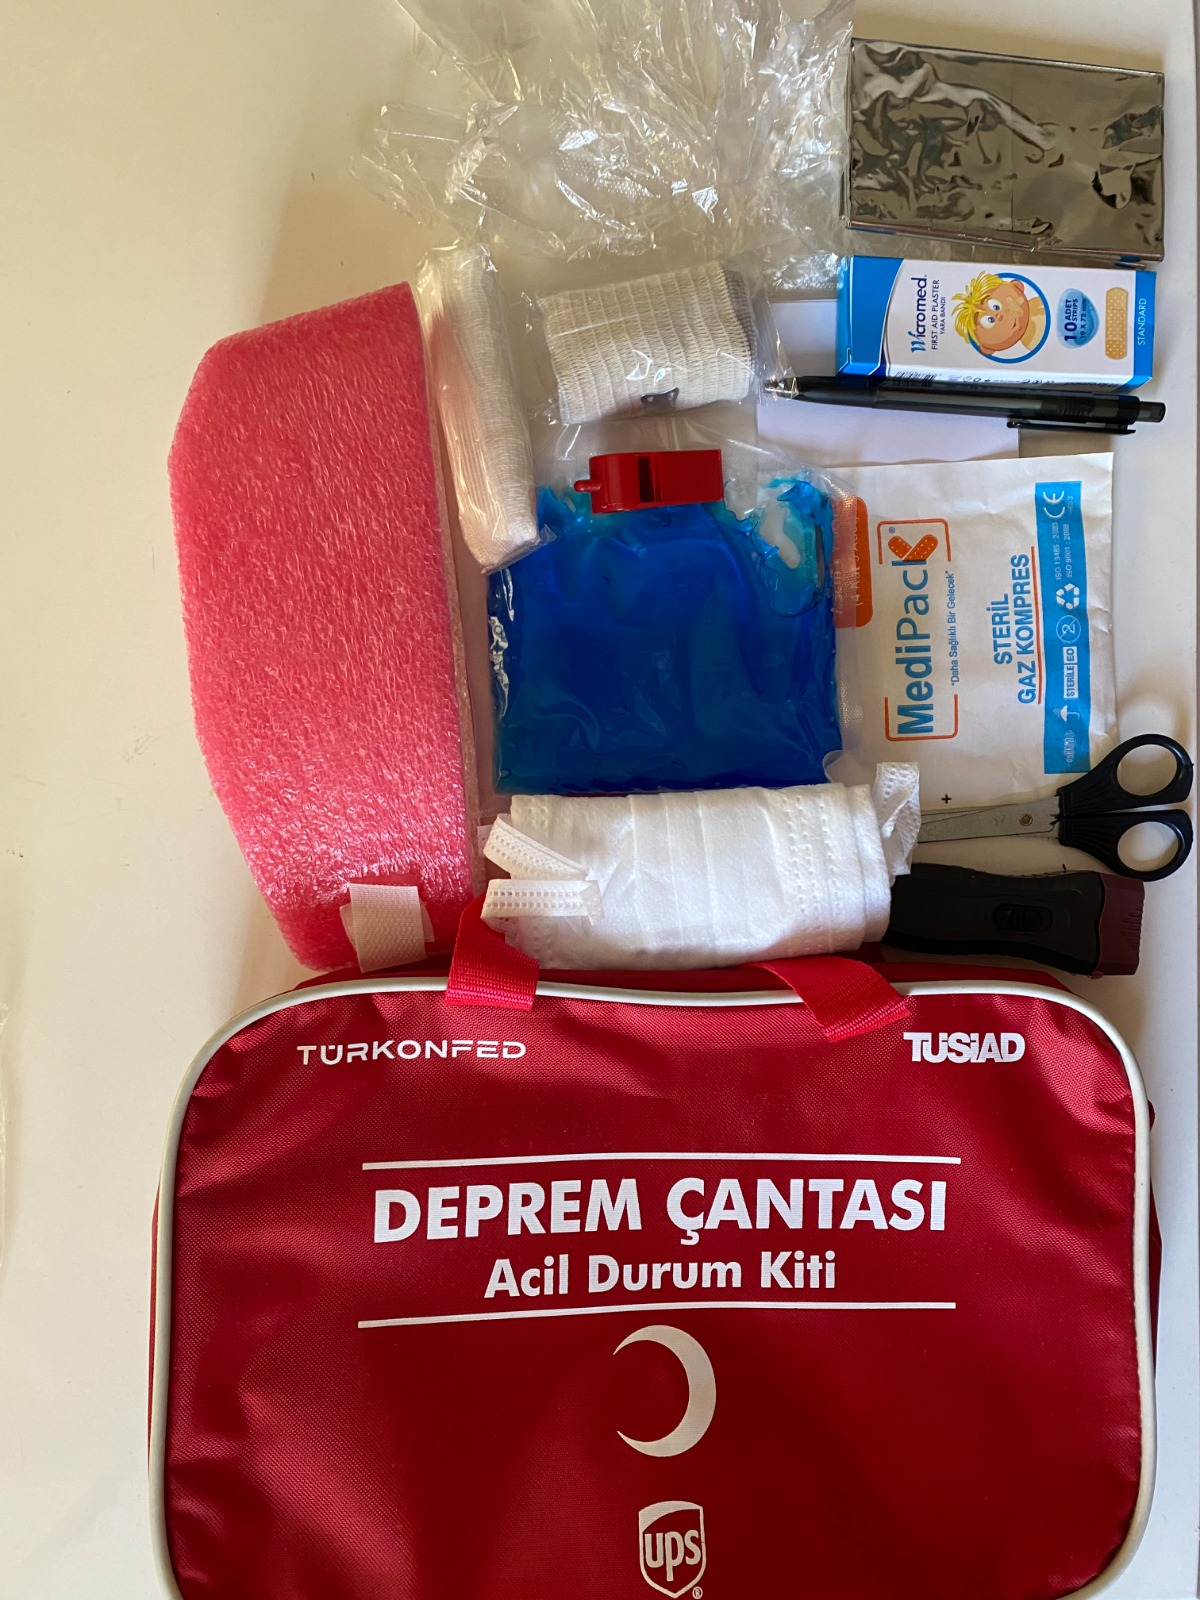 The TÜRKONFED emergency packs include useful items such as a whistle, basic first aid supplies, and more.